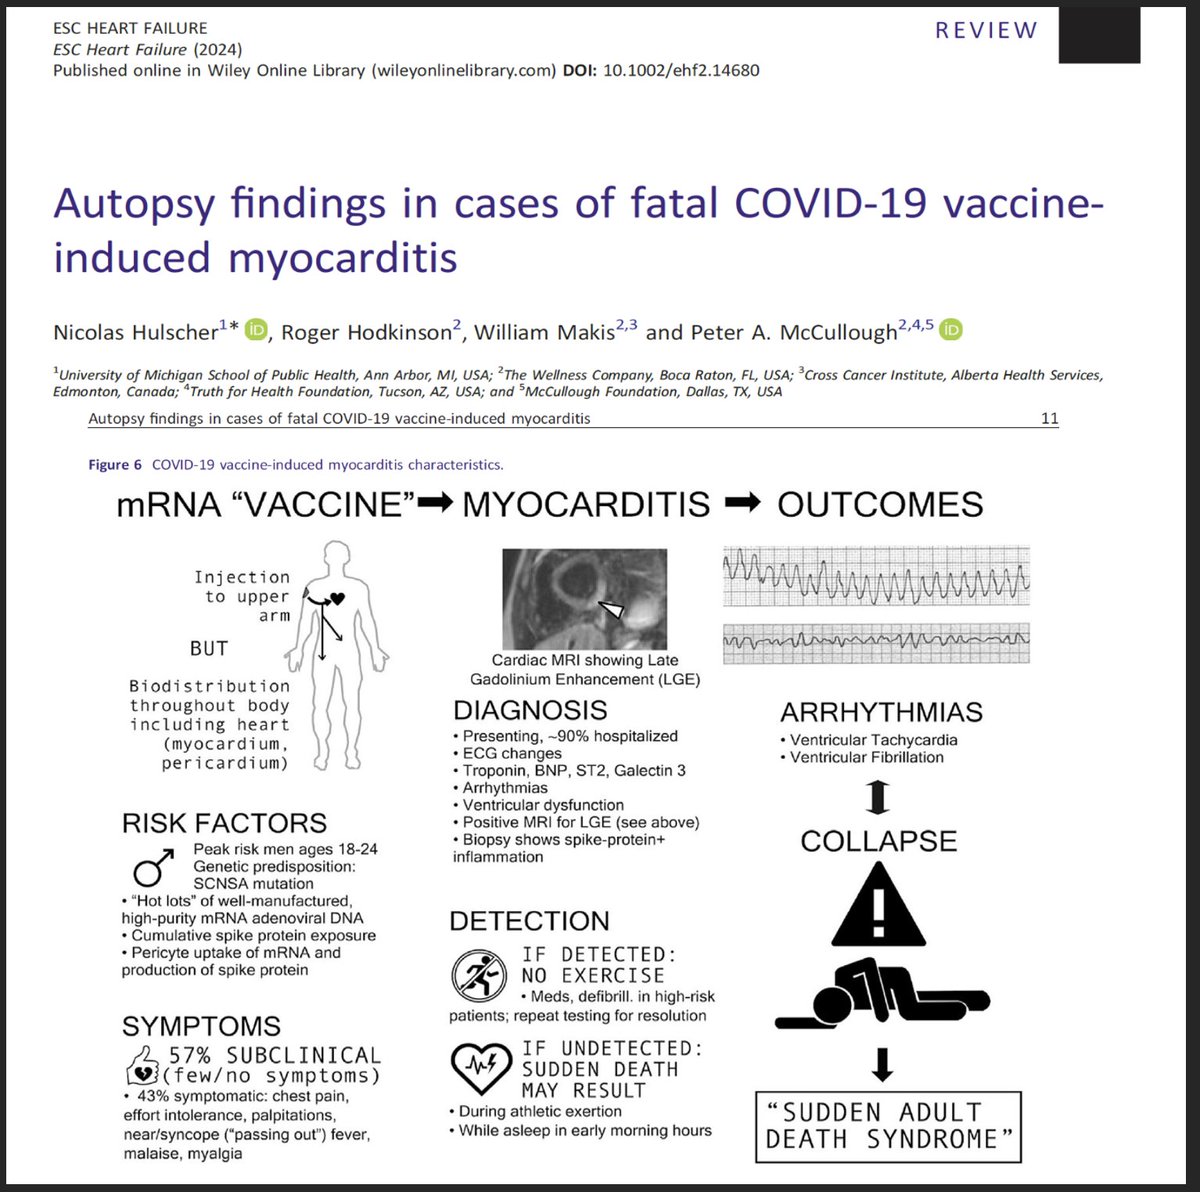 When a baby crib is recalled because there are a handful of injuries, we don't say 'but what about all the babies who were fine!' When a Covid vaccine is connected to myocarditis in hundreds of studies worldwide, our focus should not be on those who did fine, it should be on the